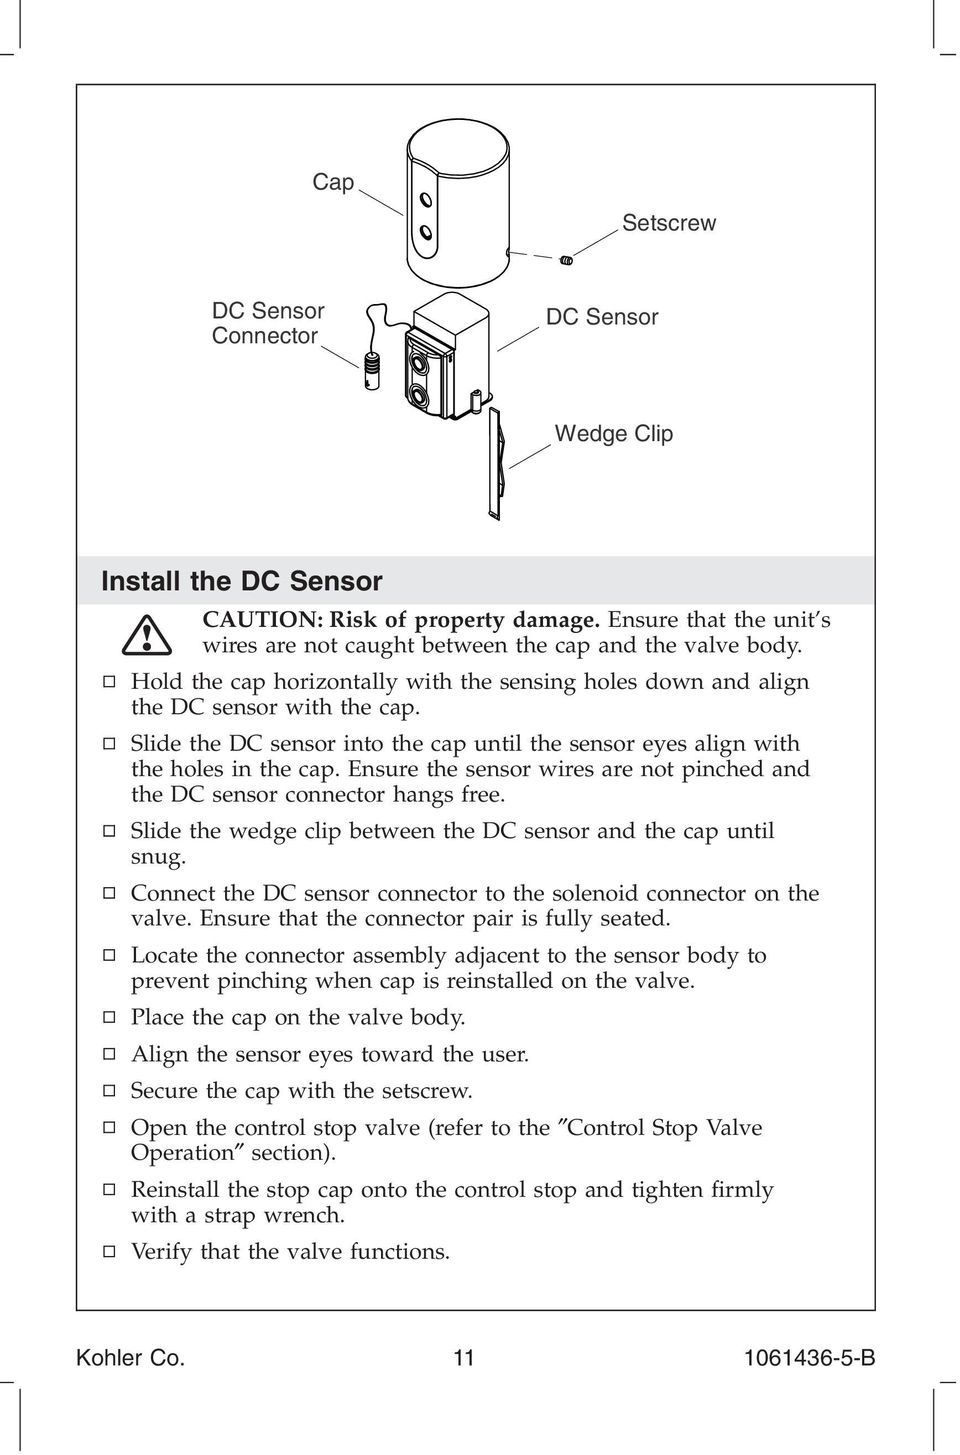 Ensure the sensor wires are not pinched and the DC sensor connector hangs free. Slide the wedge clip between the DC sensor and the cap until snug.